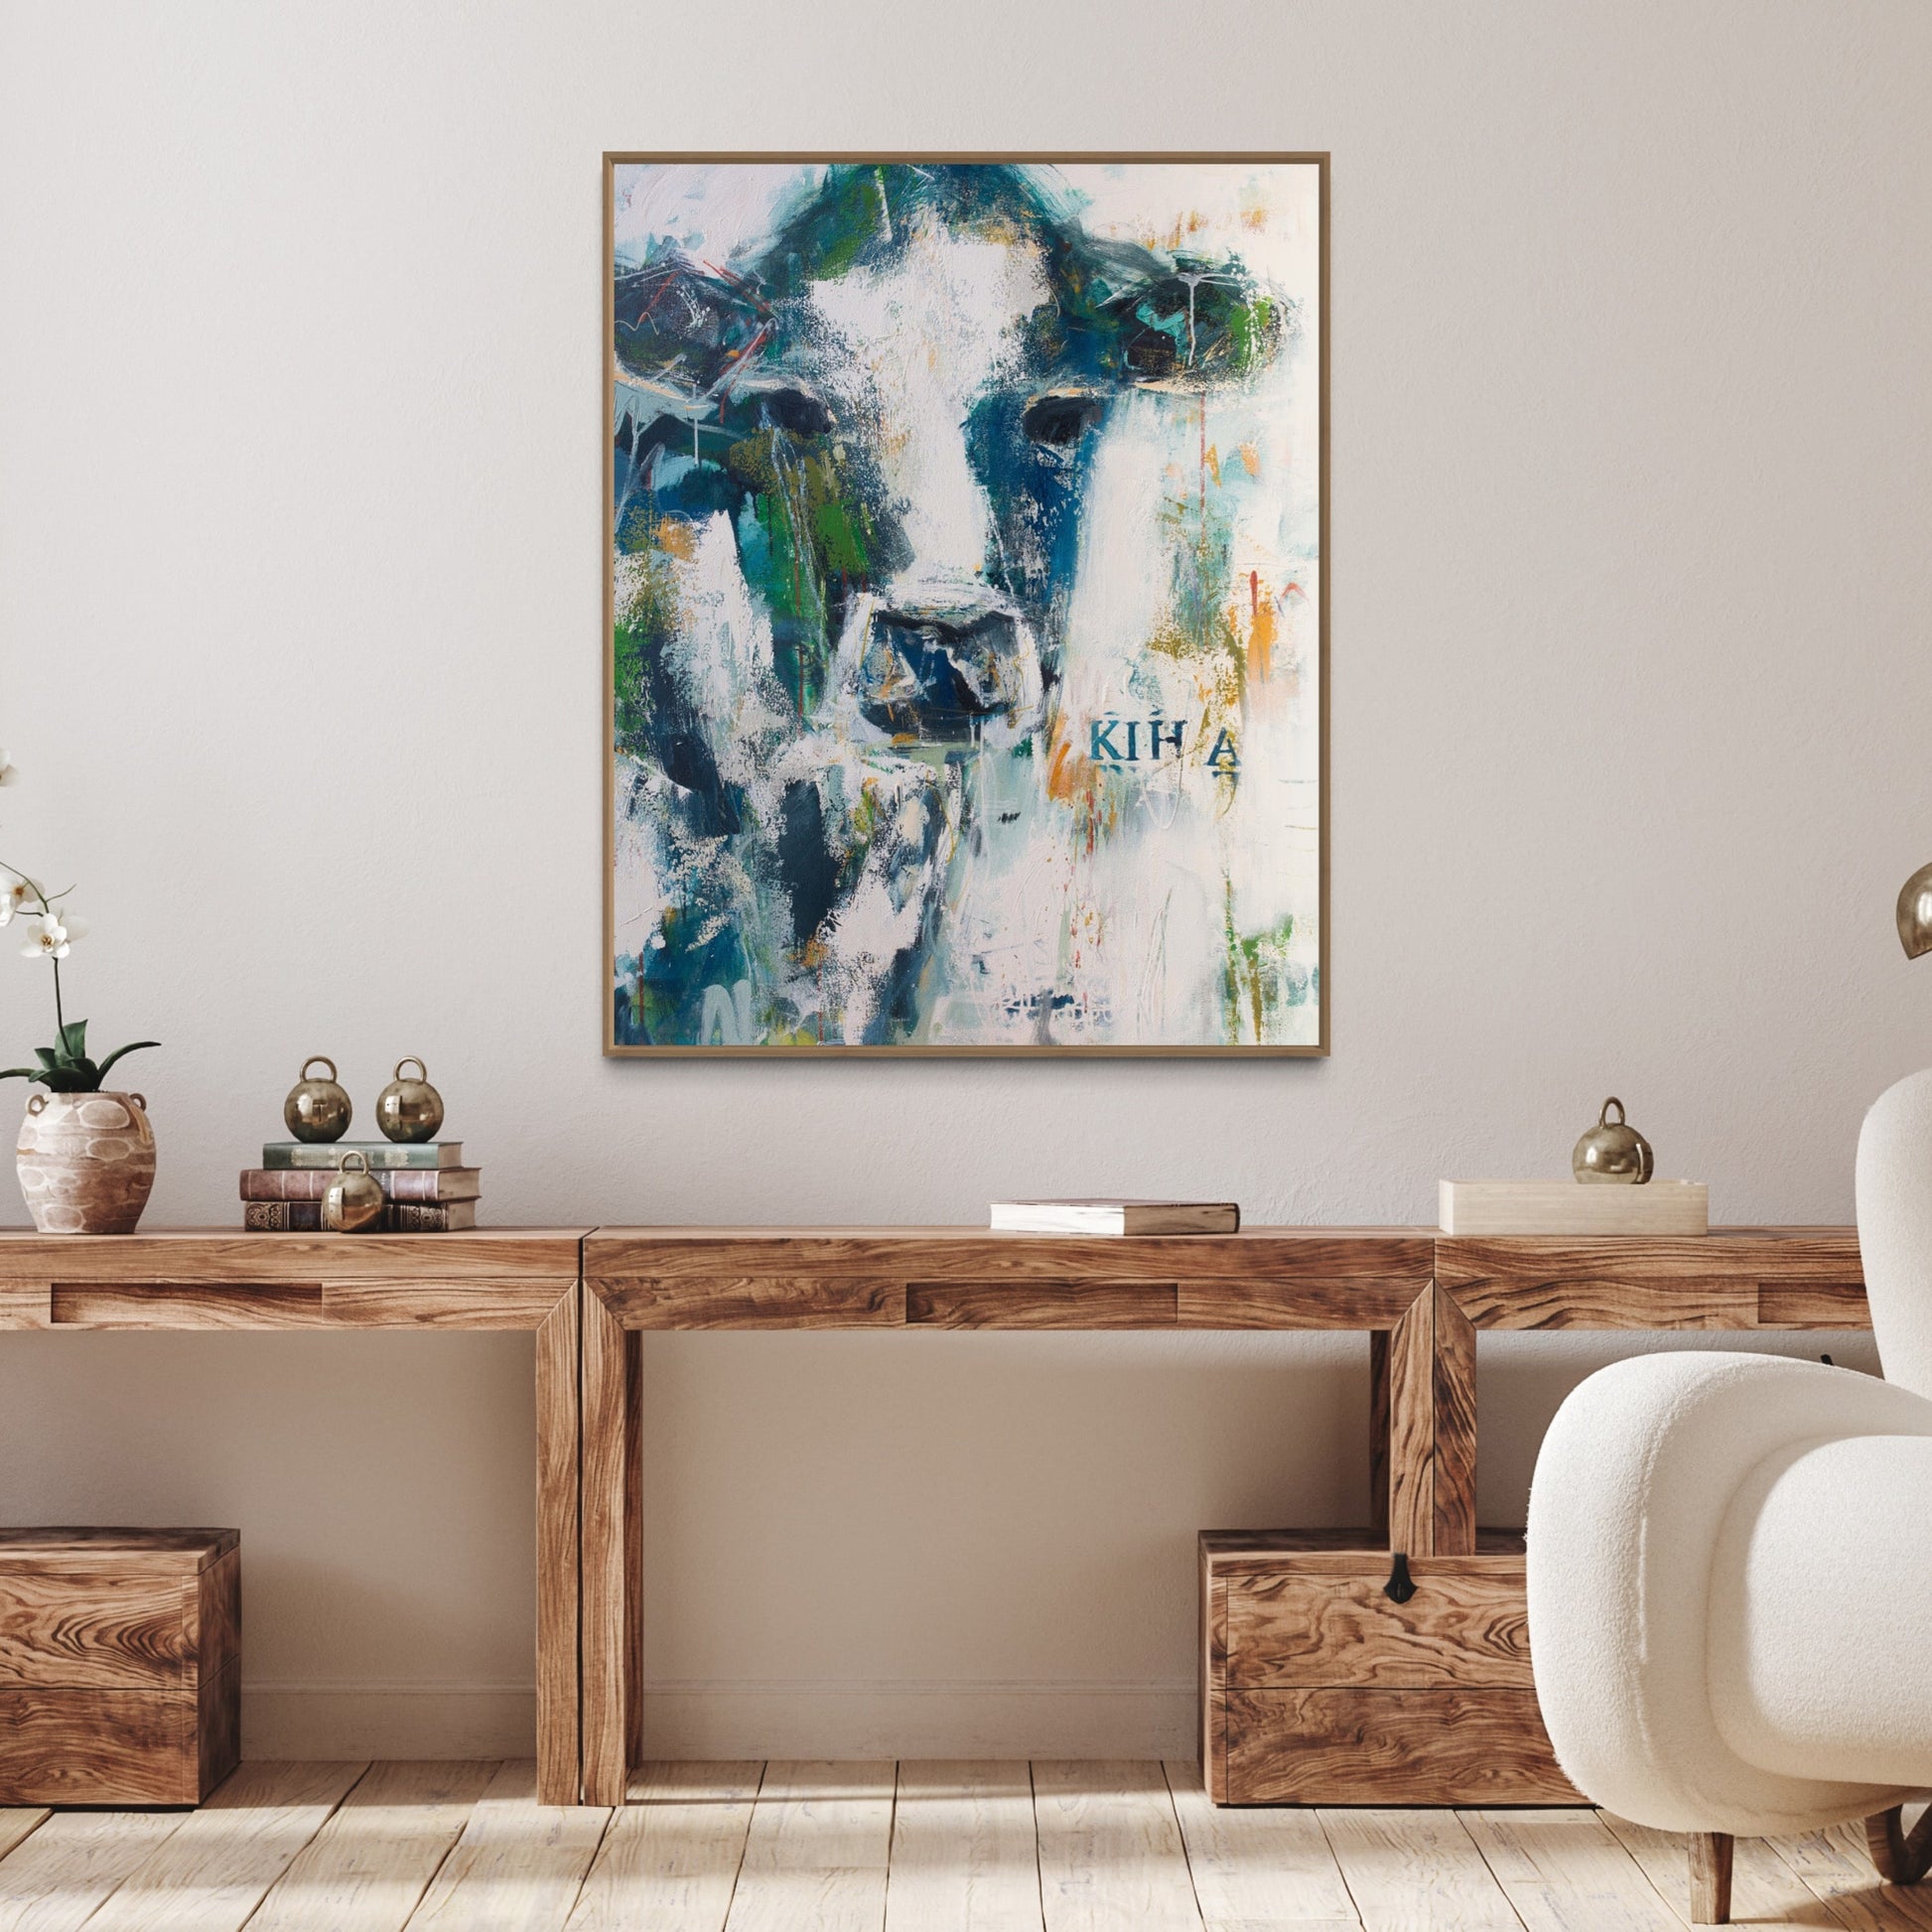 Kiha  - Abstract Cow by Australian Artist Rose Hewartson Original Abstract Painting on Canvas Framed 96x123 cm Statement Piece